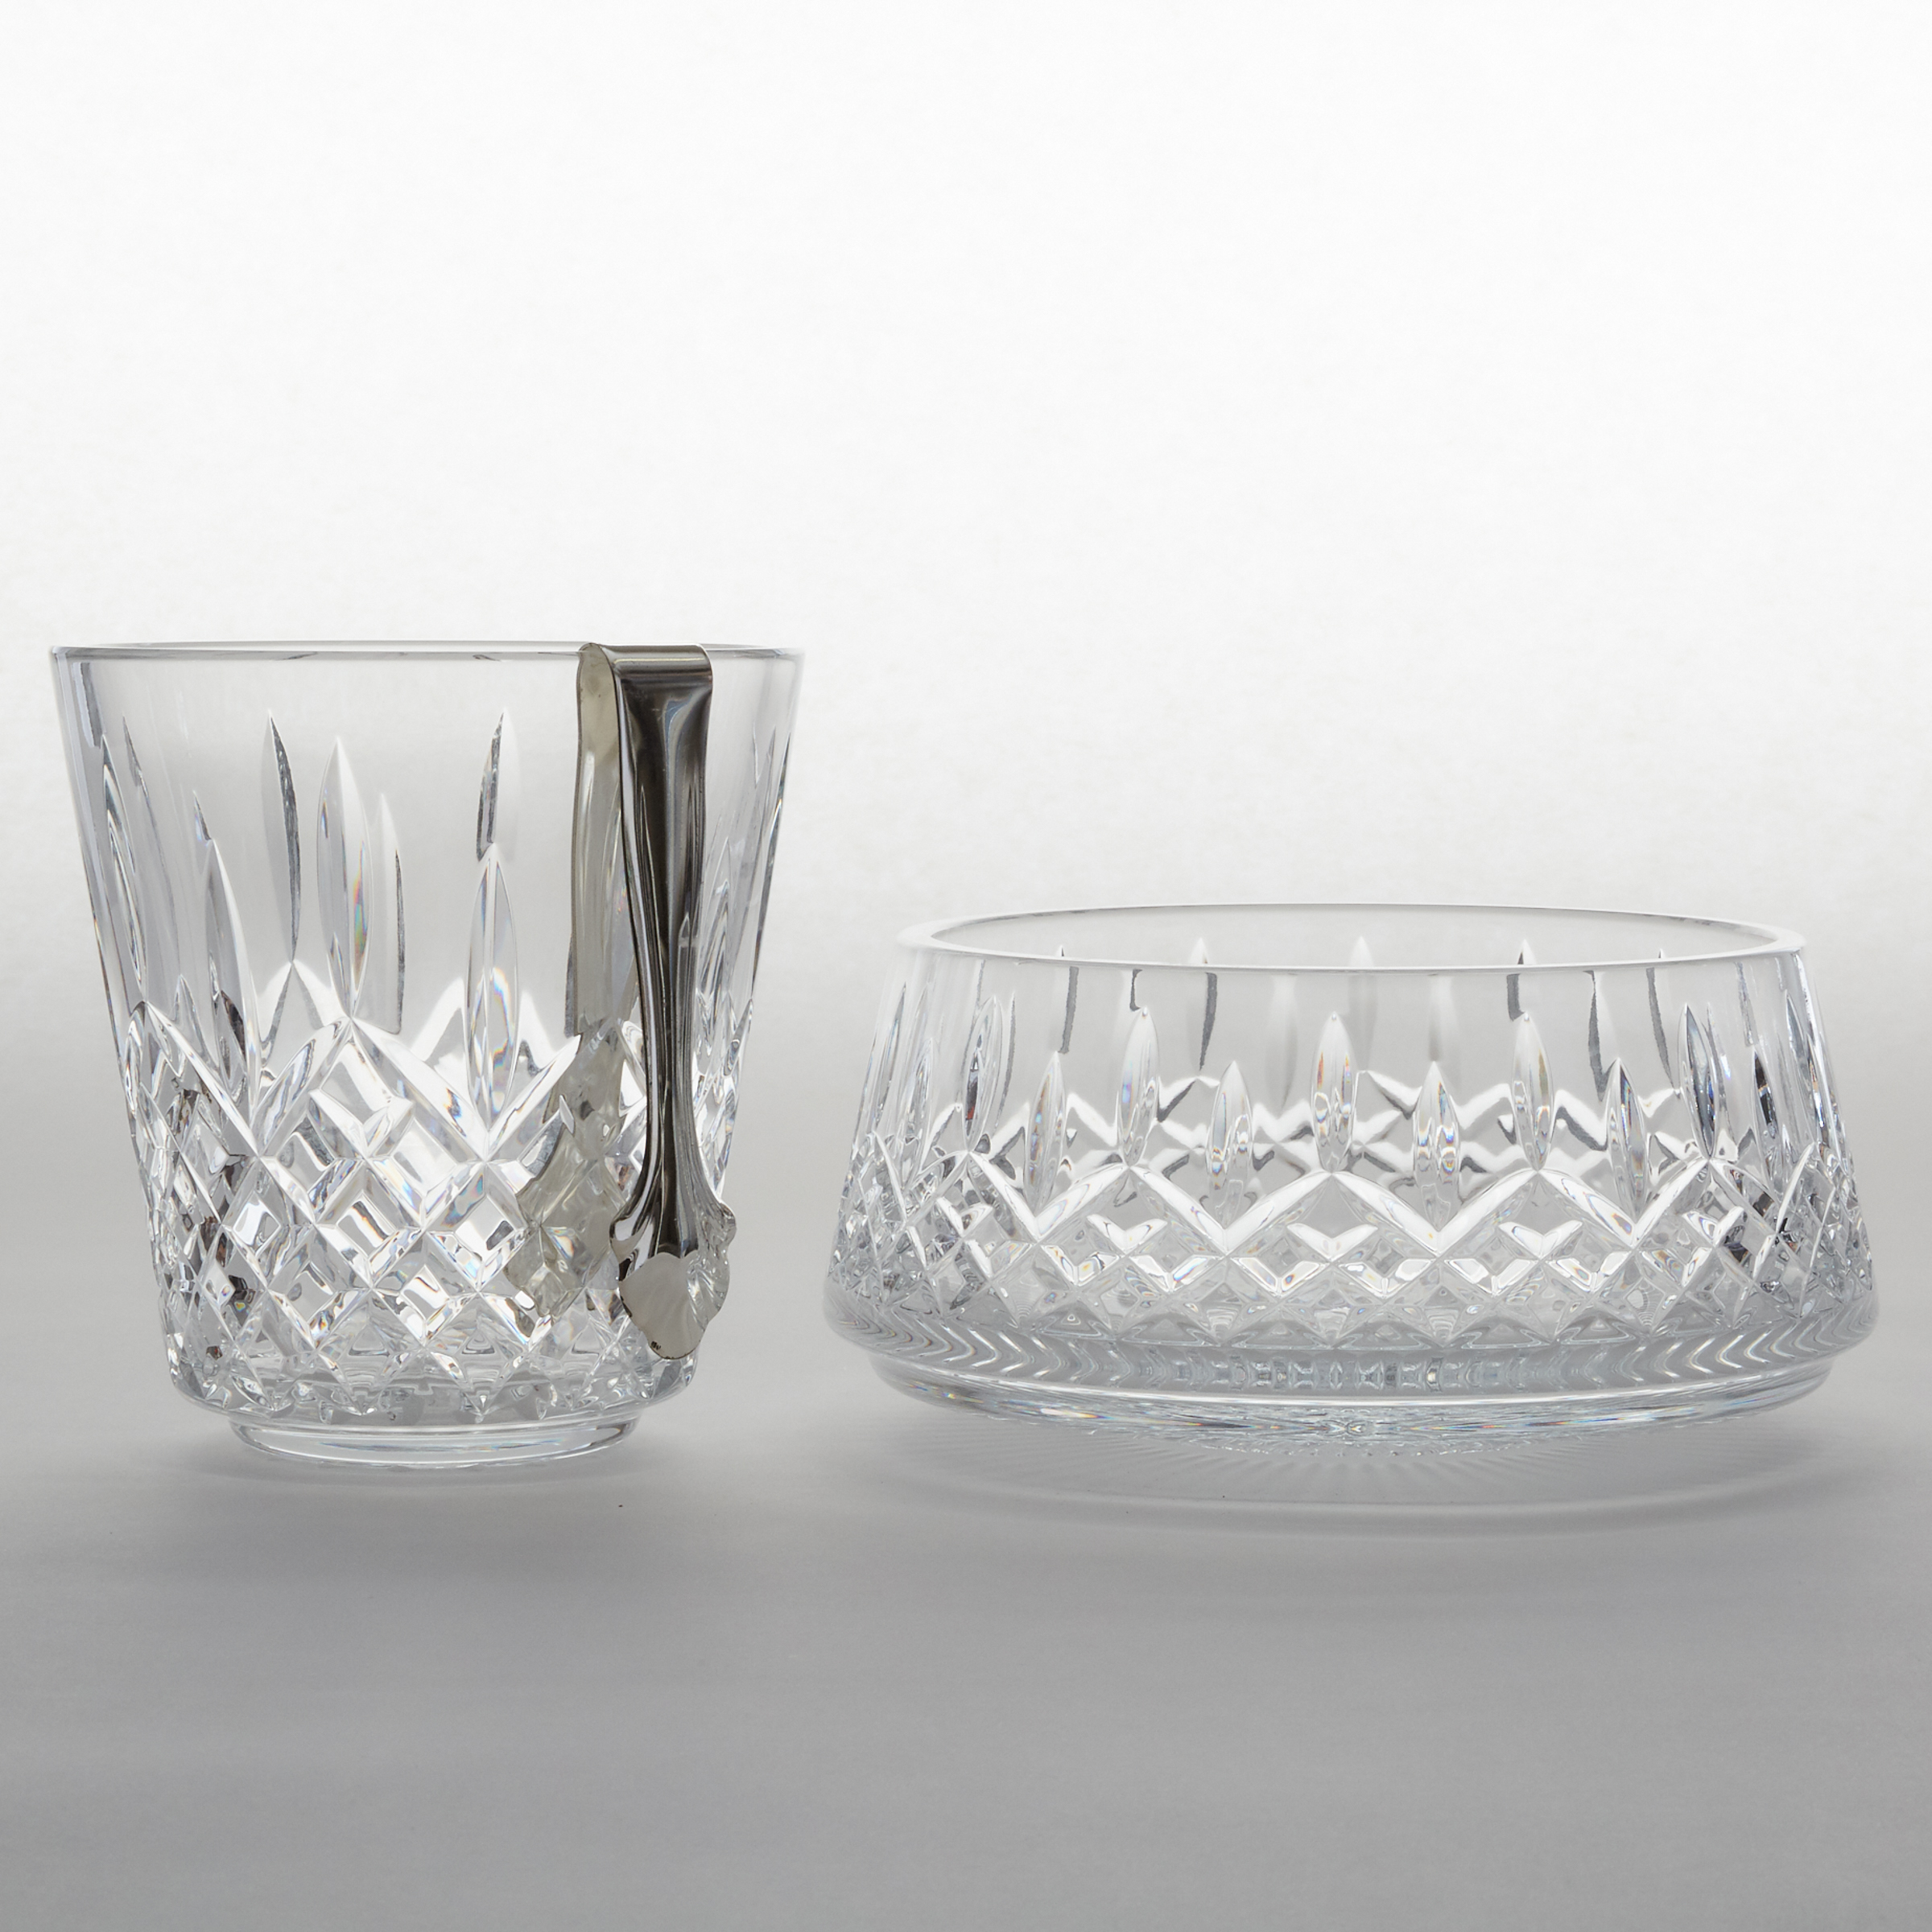 Waterford 'Lismore' Cut Glass Bowl and Ice Bucket, 20th century